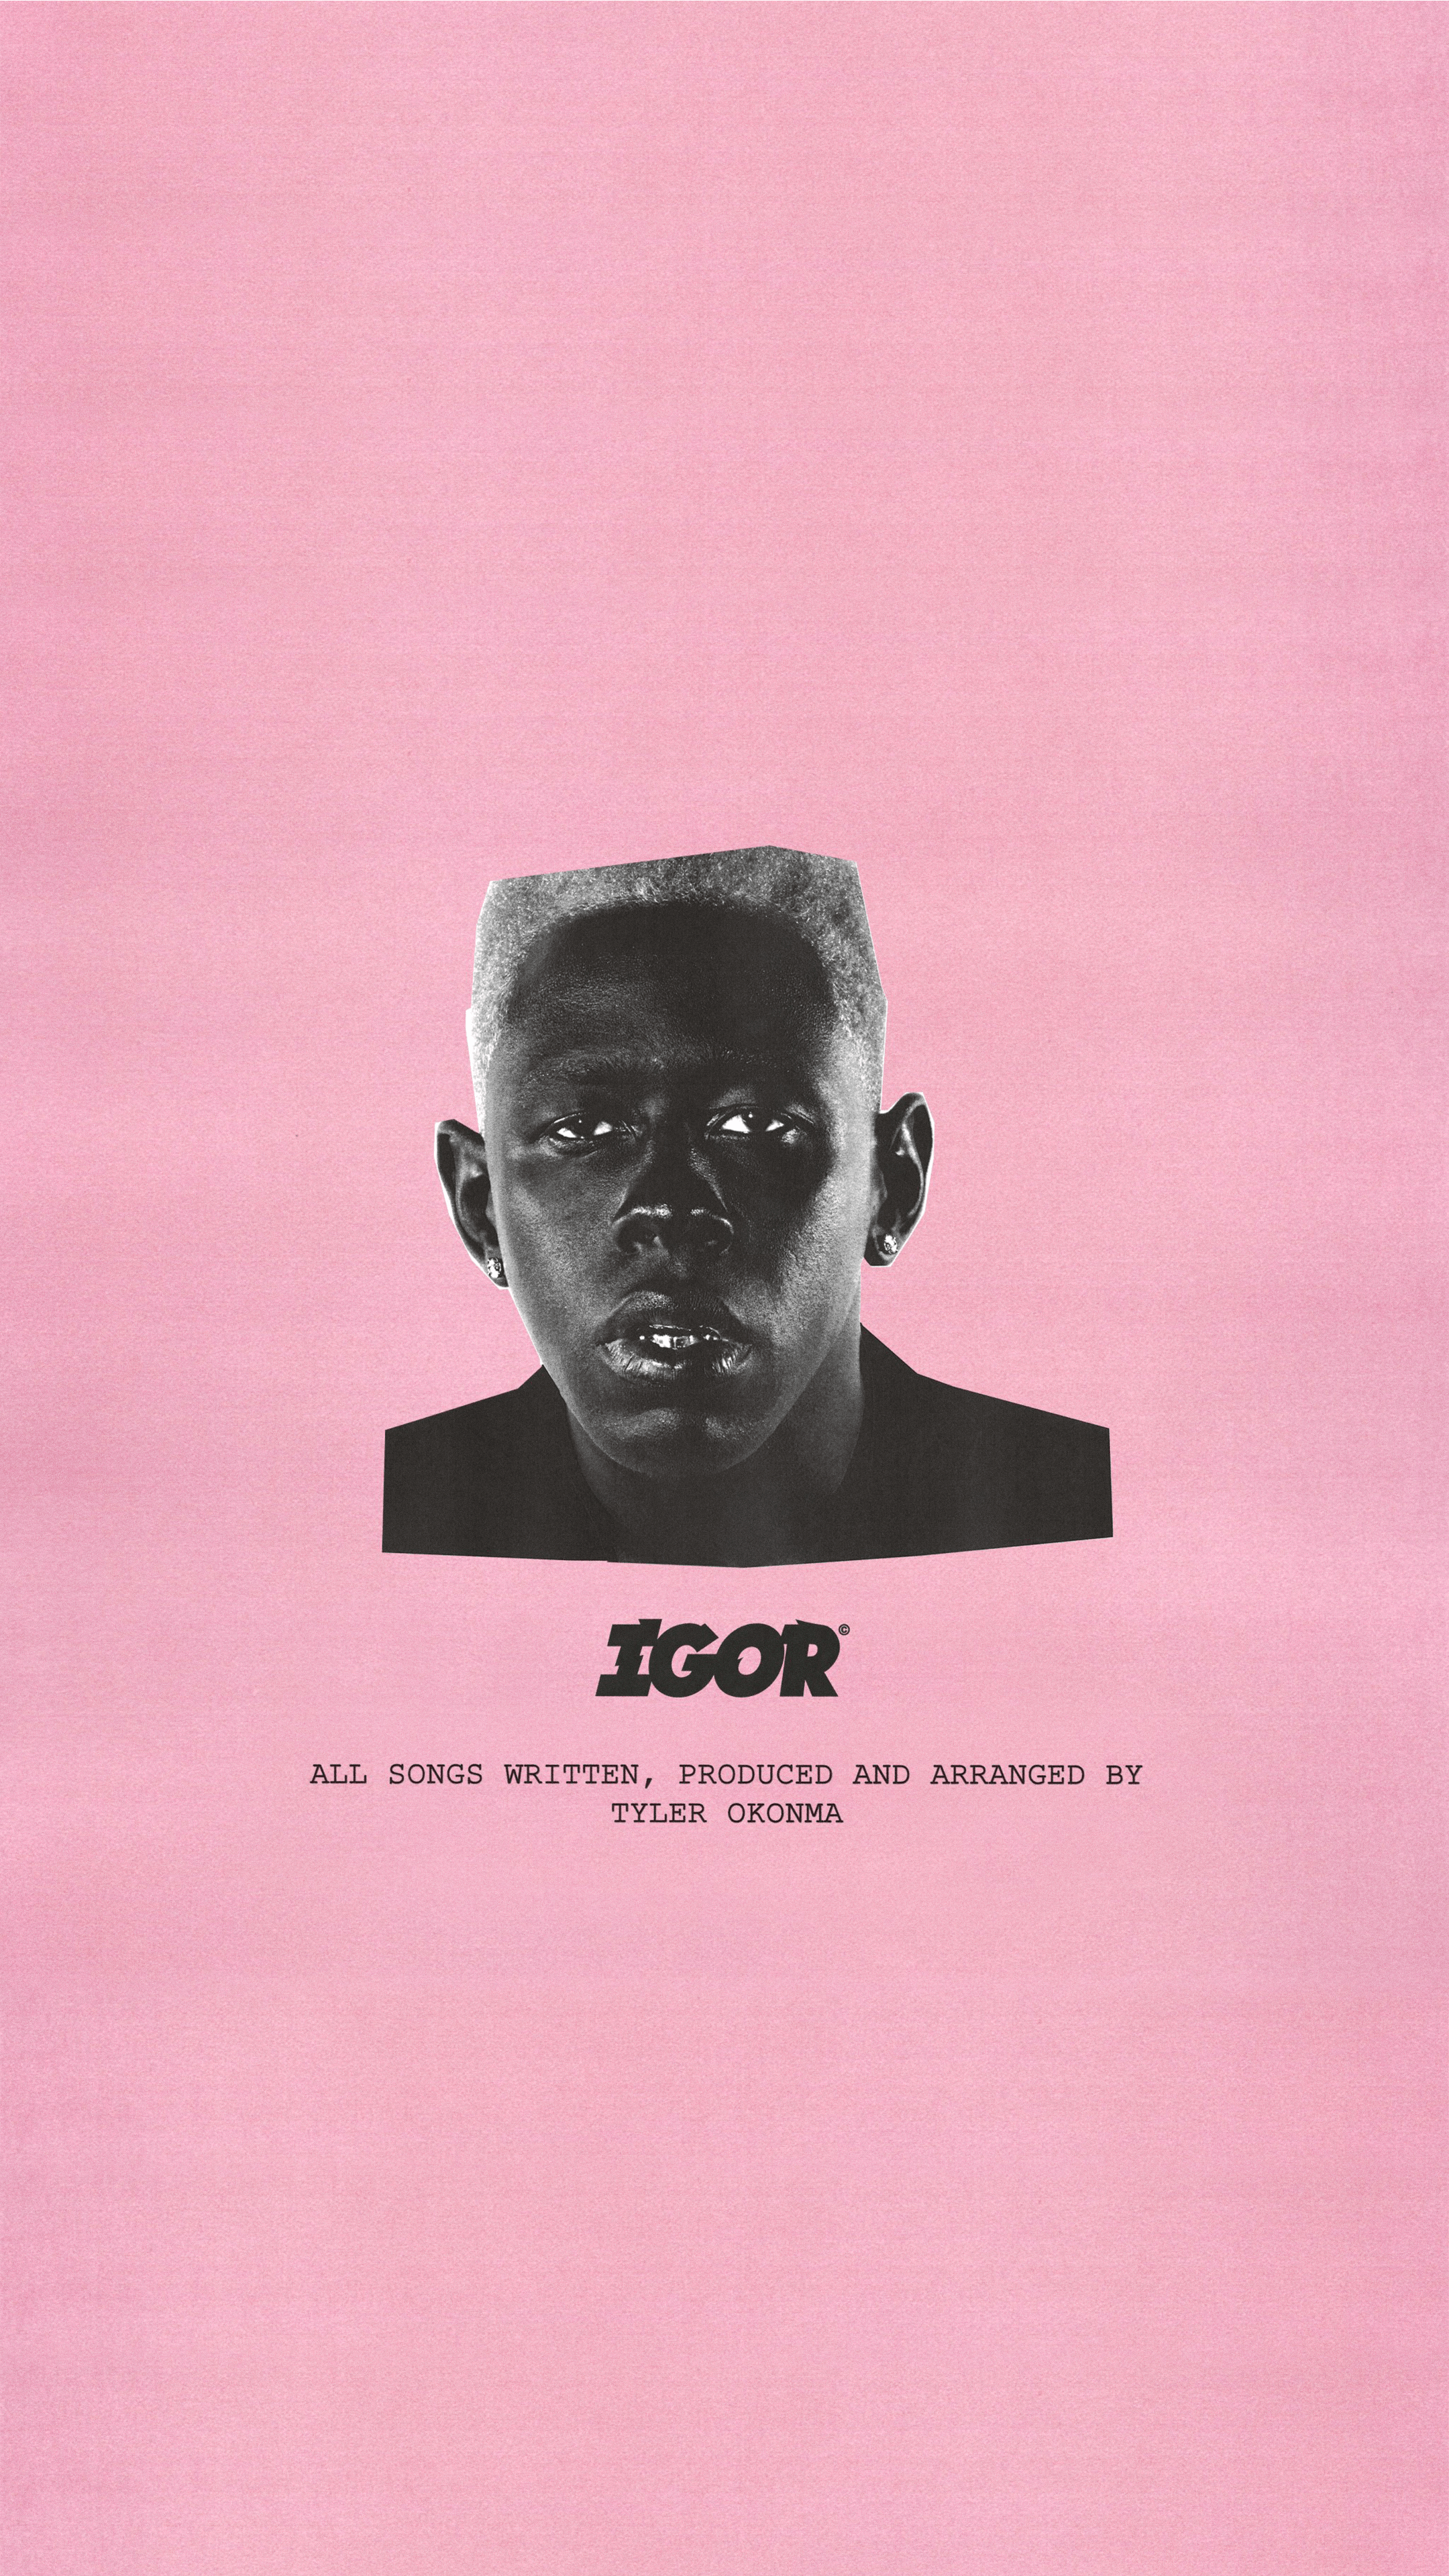 4K IGOR Wallpaper with consistent background texture